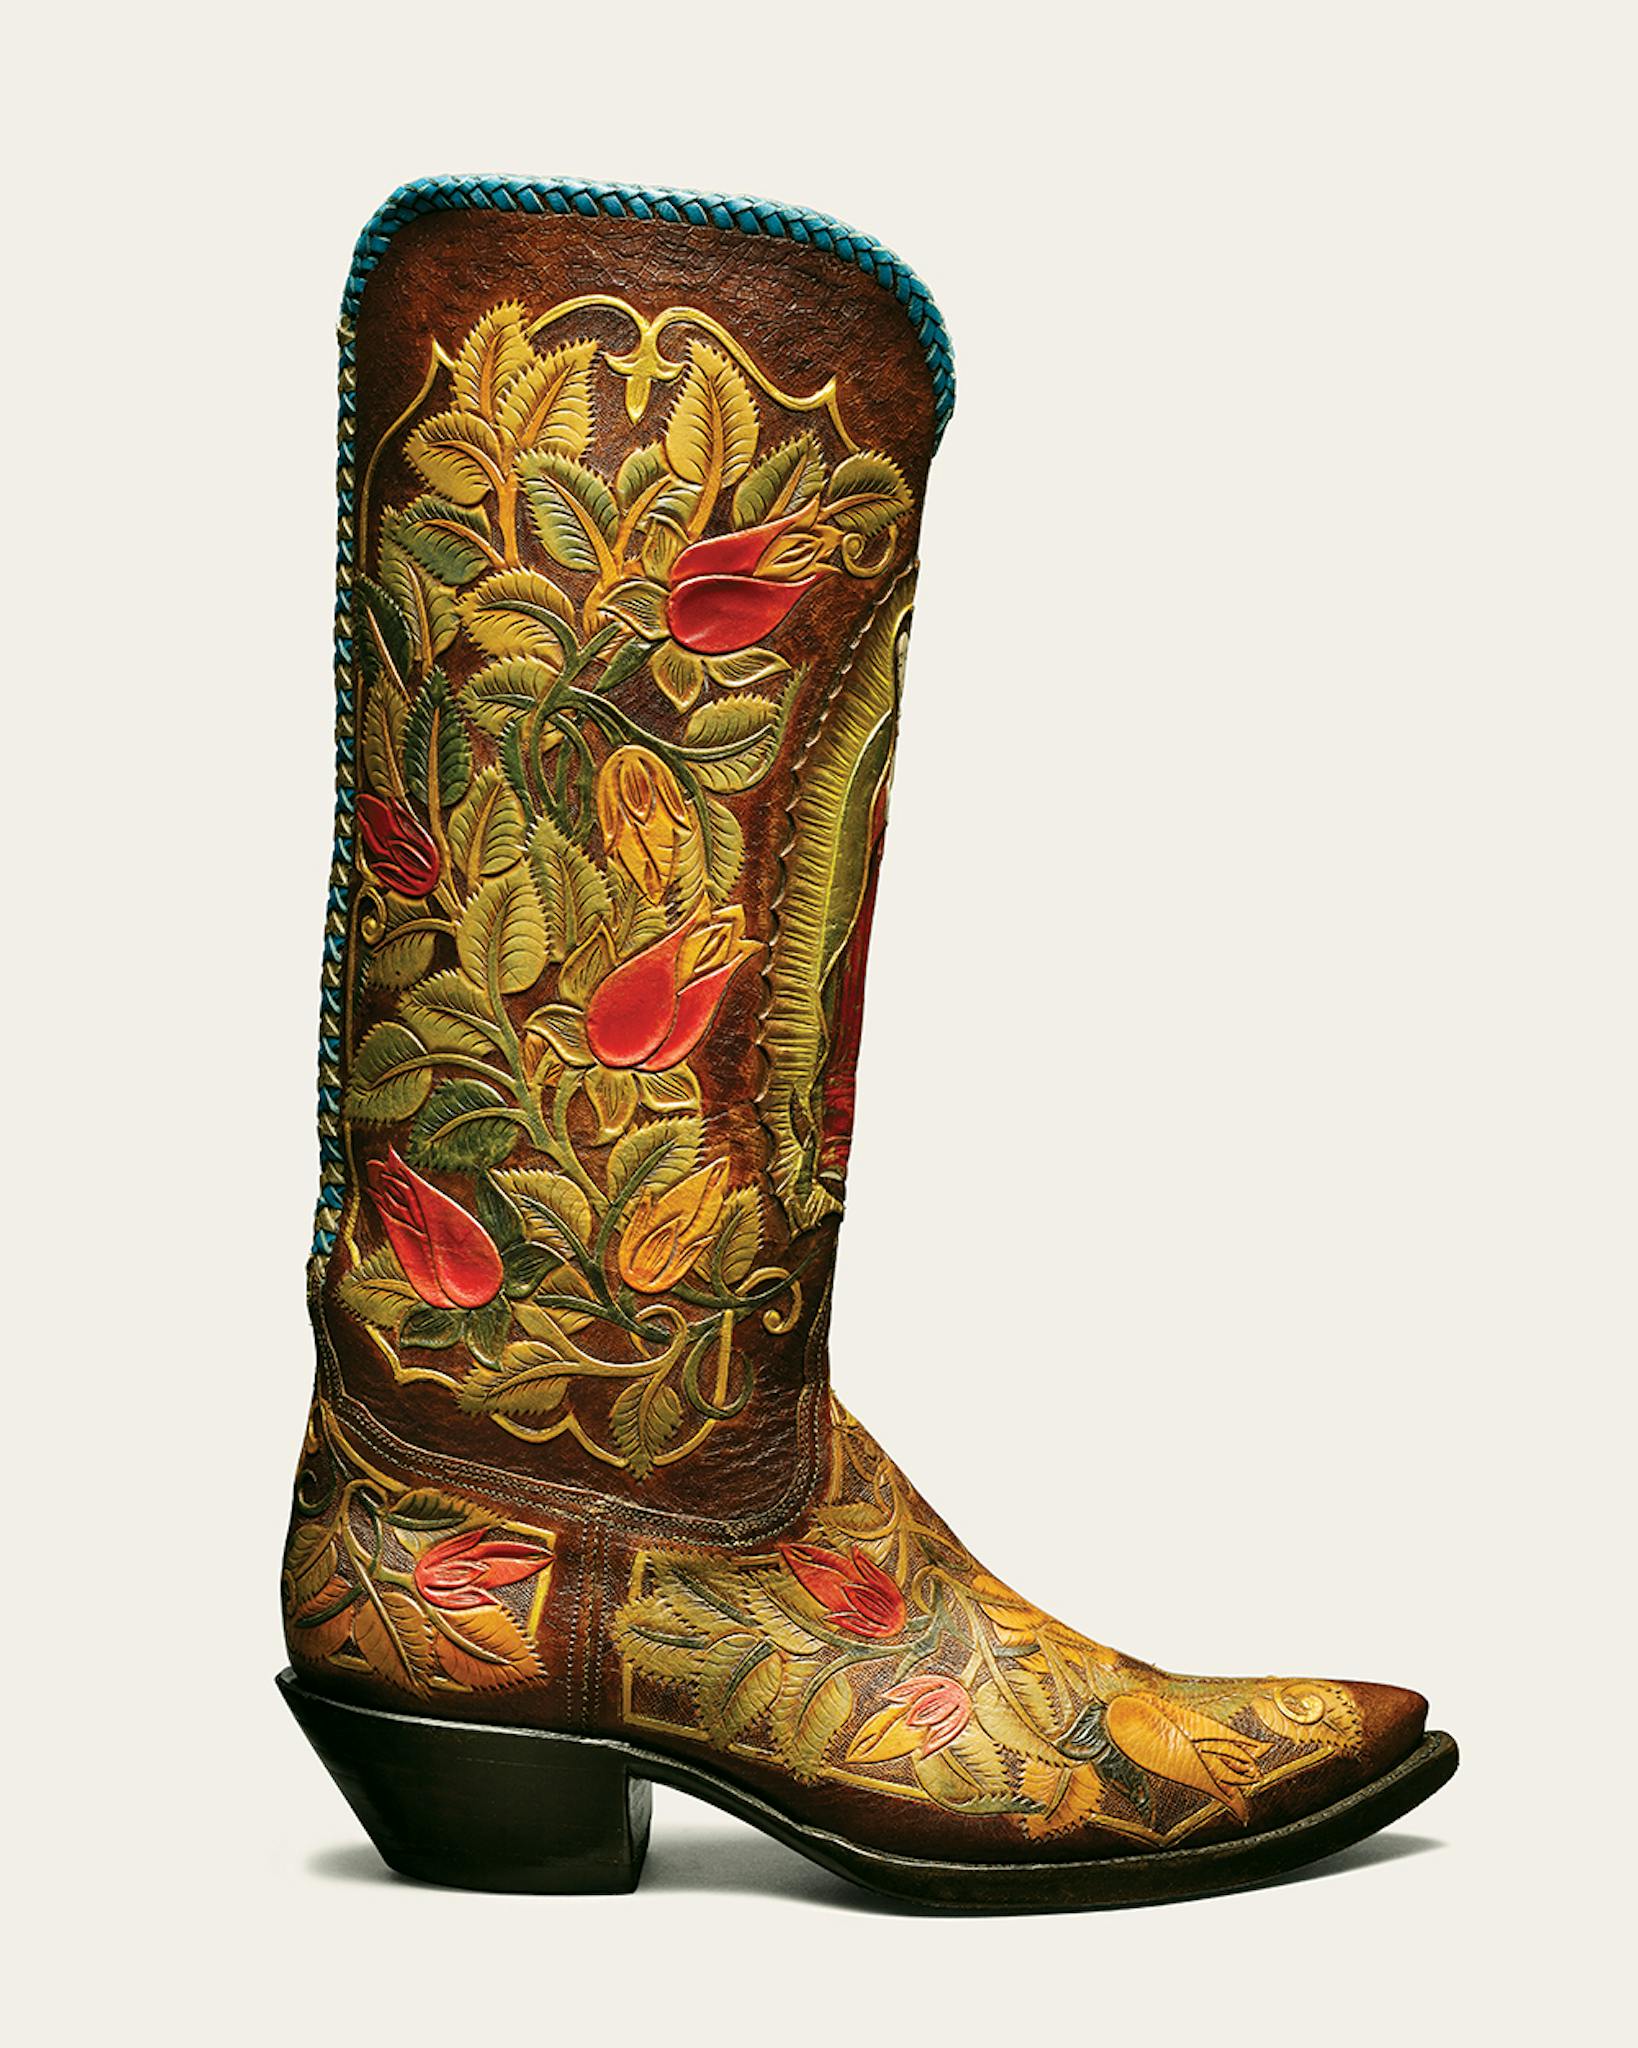 Tres Outlaws Boot Company boot with floral detailing.